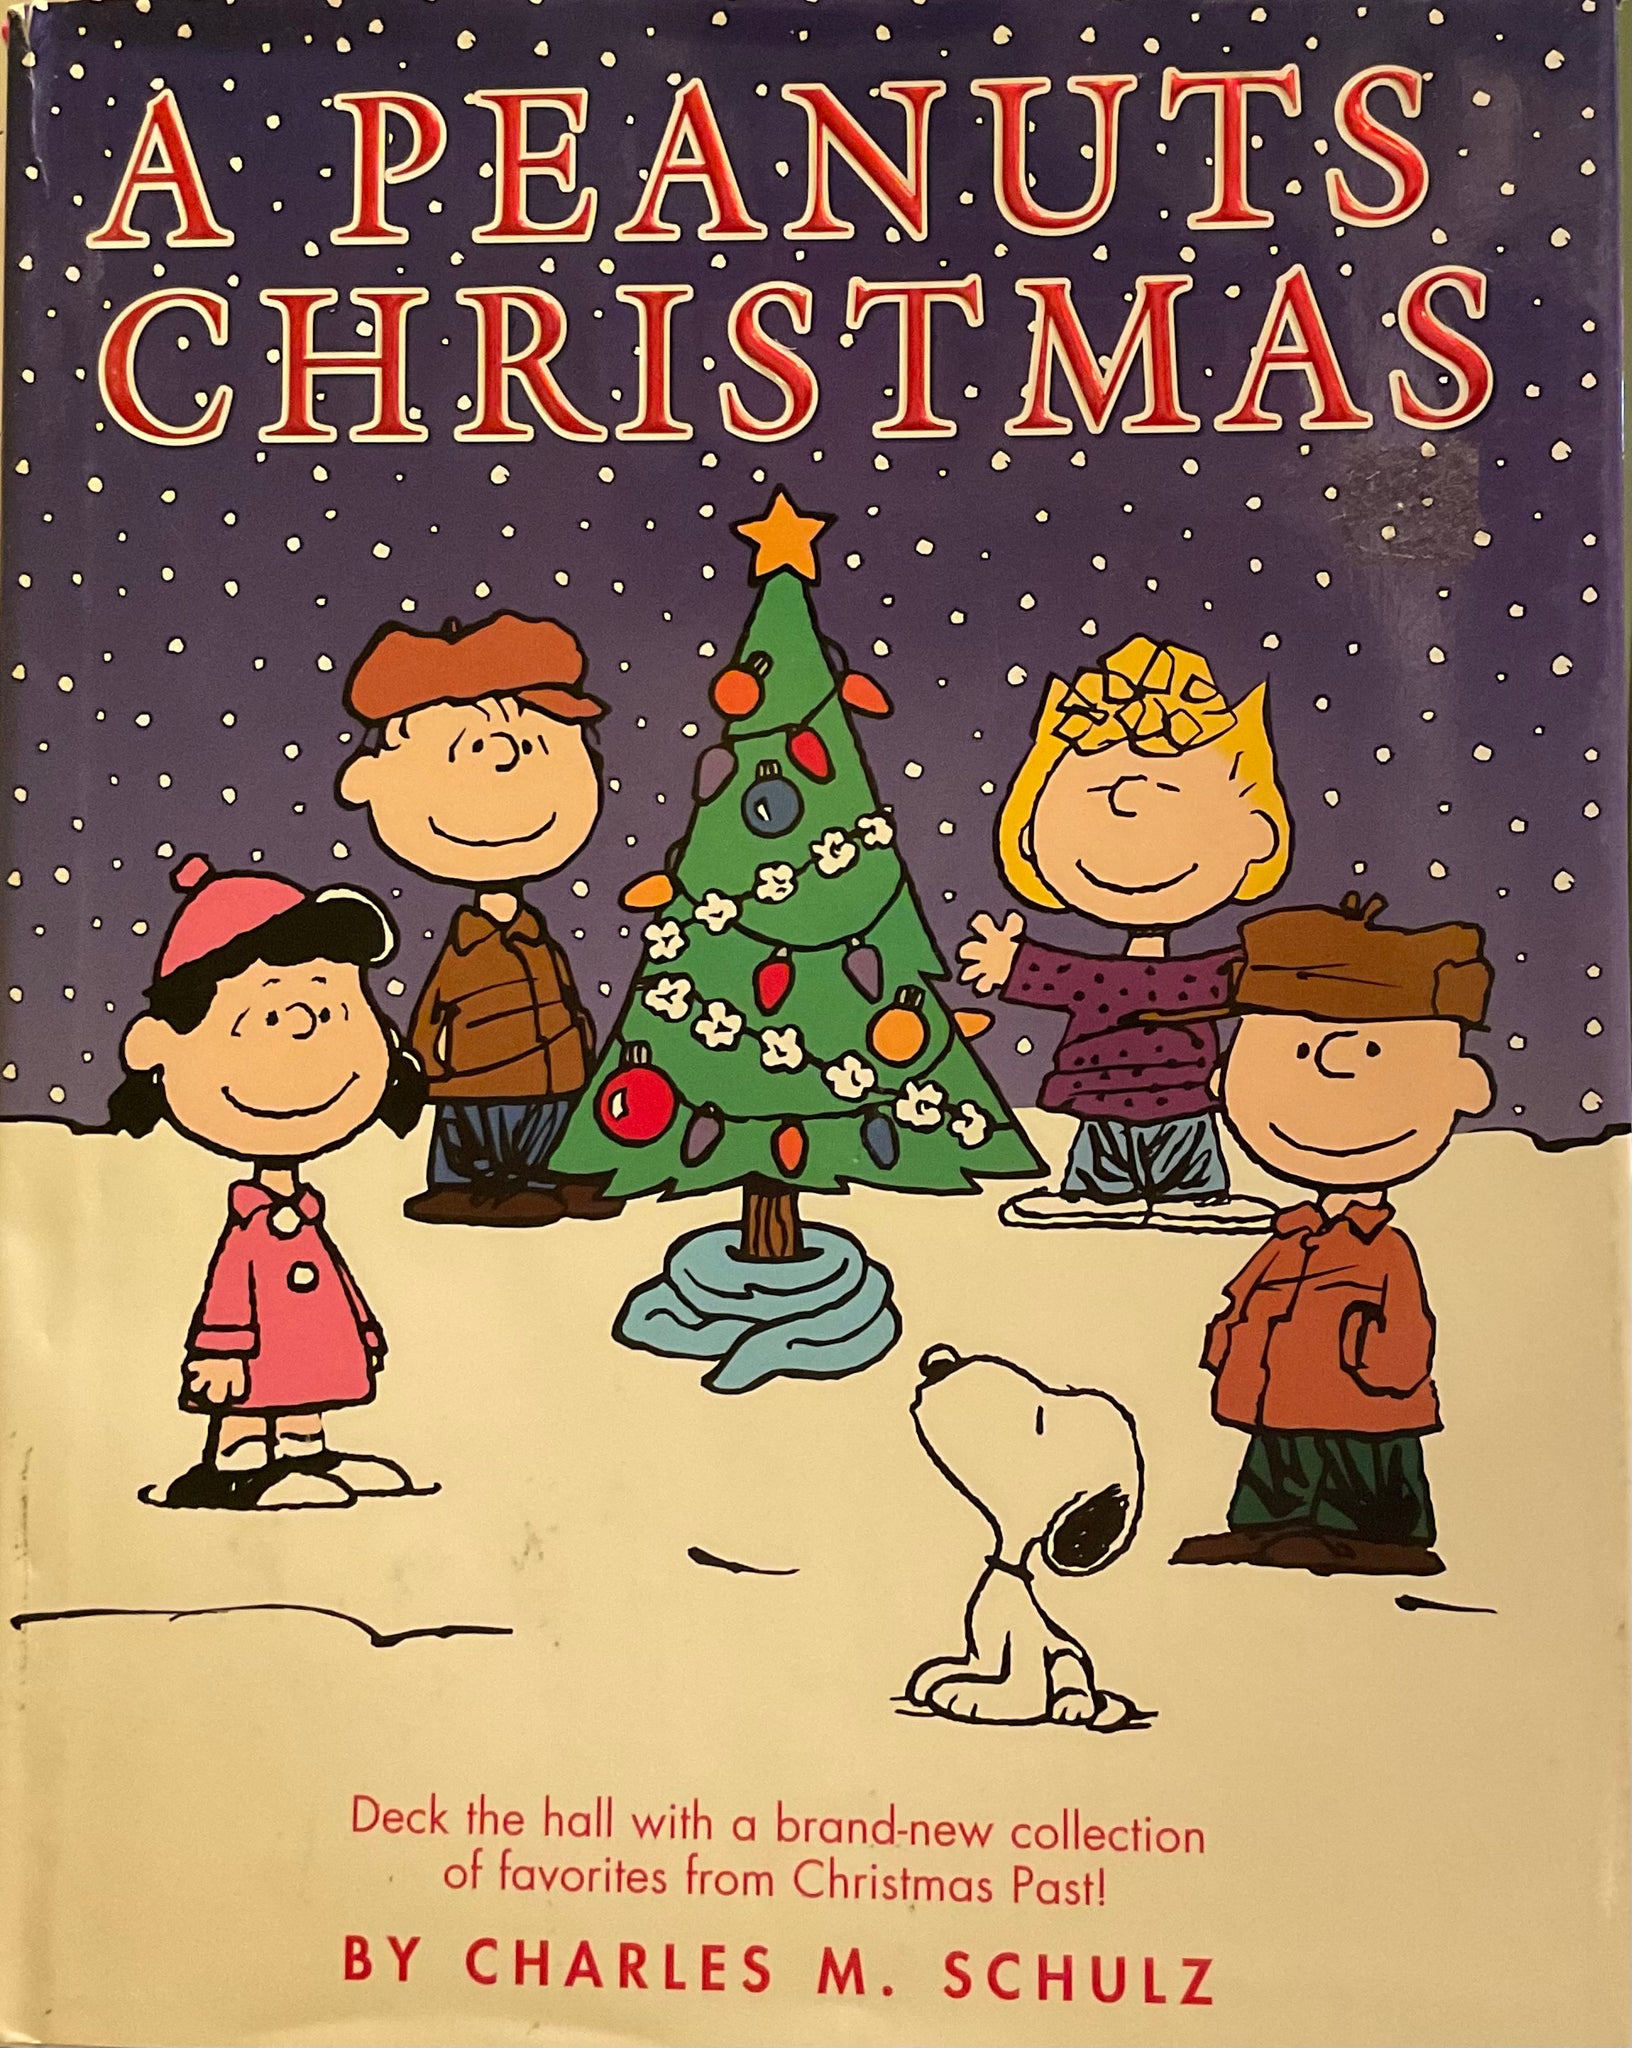 A Peanuts Christmas, Charles M. Schulz